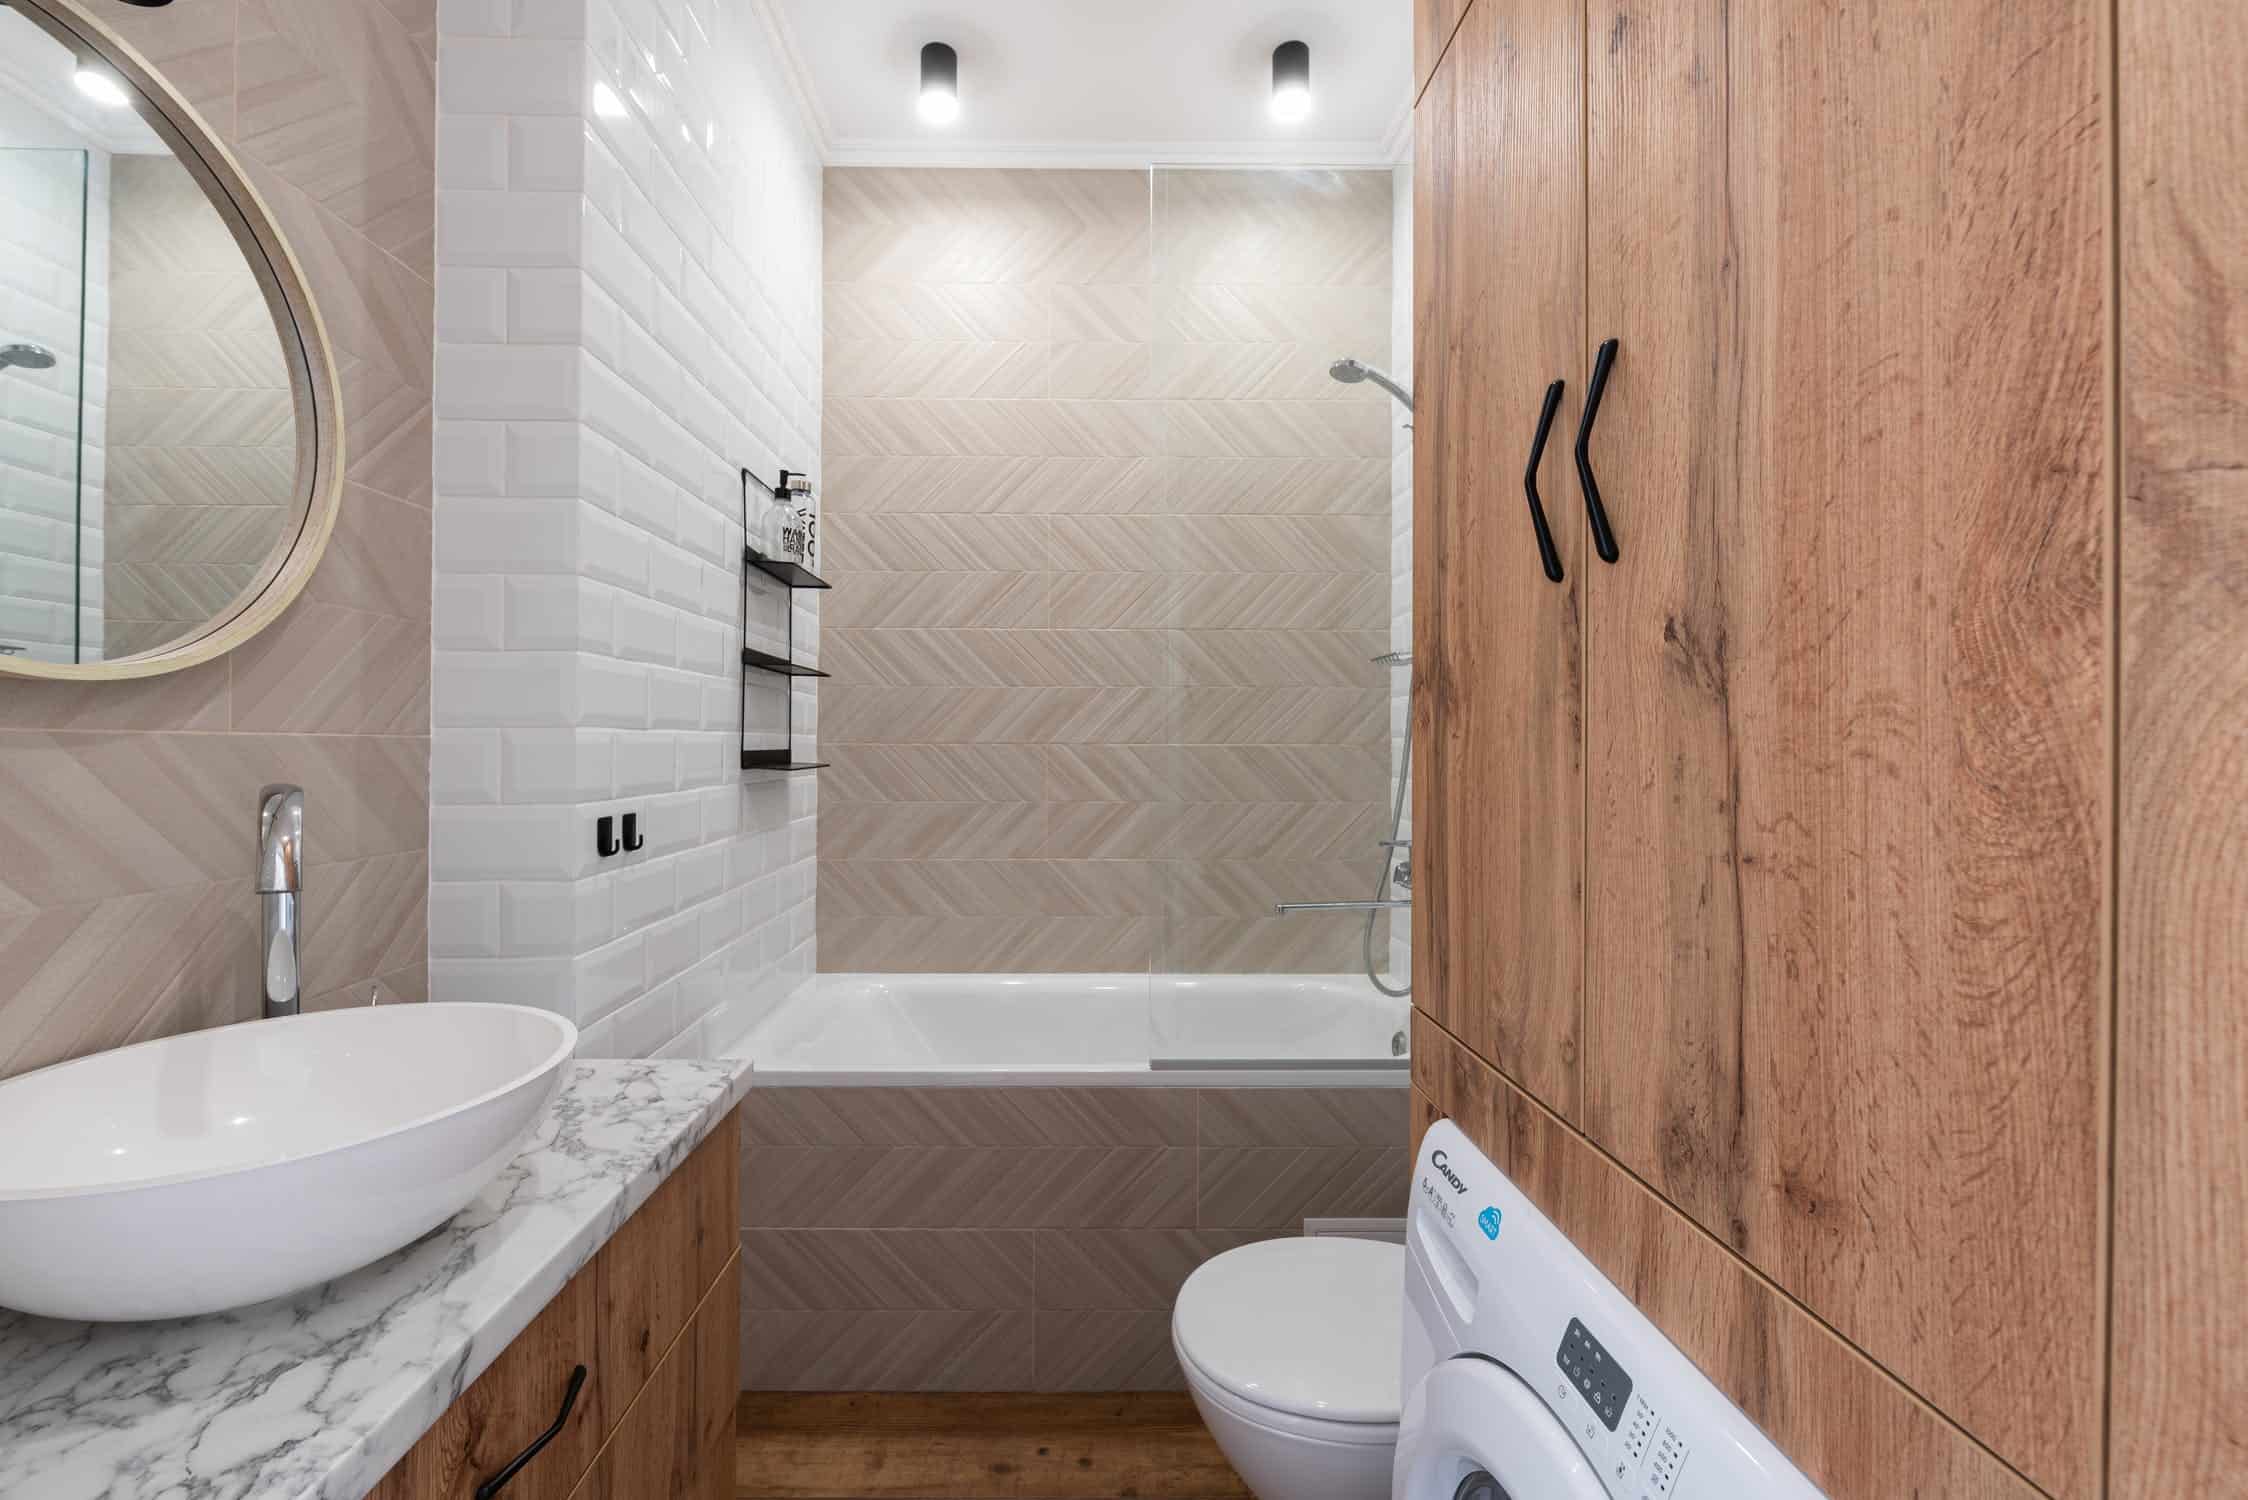 Modern bathroom with wood finishes and tiles walls